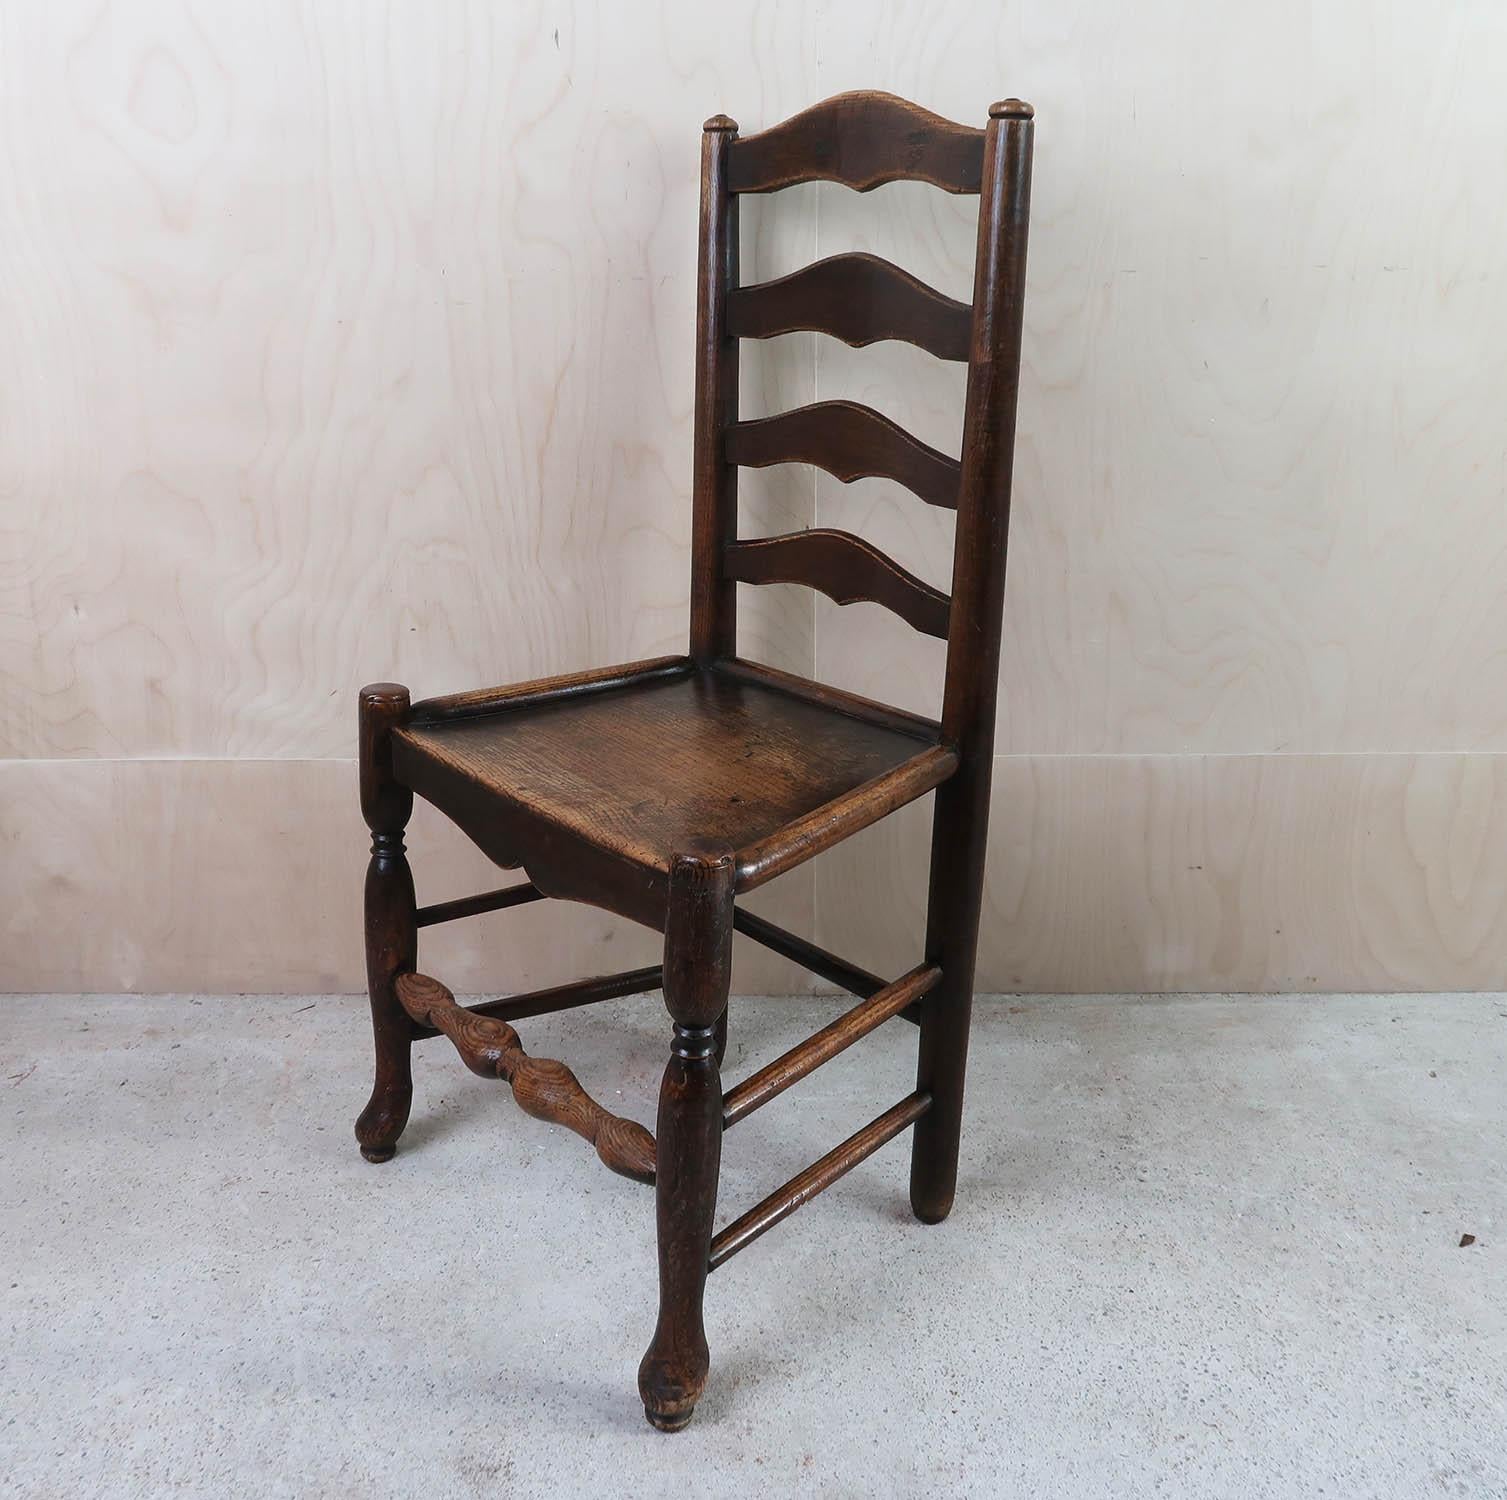 Near Pair of Antique Welsh Country Ladder back Chairs. C.1800 (Poliert) im Angebot